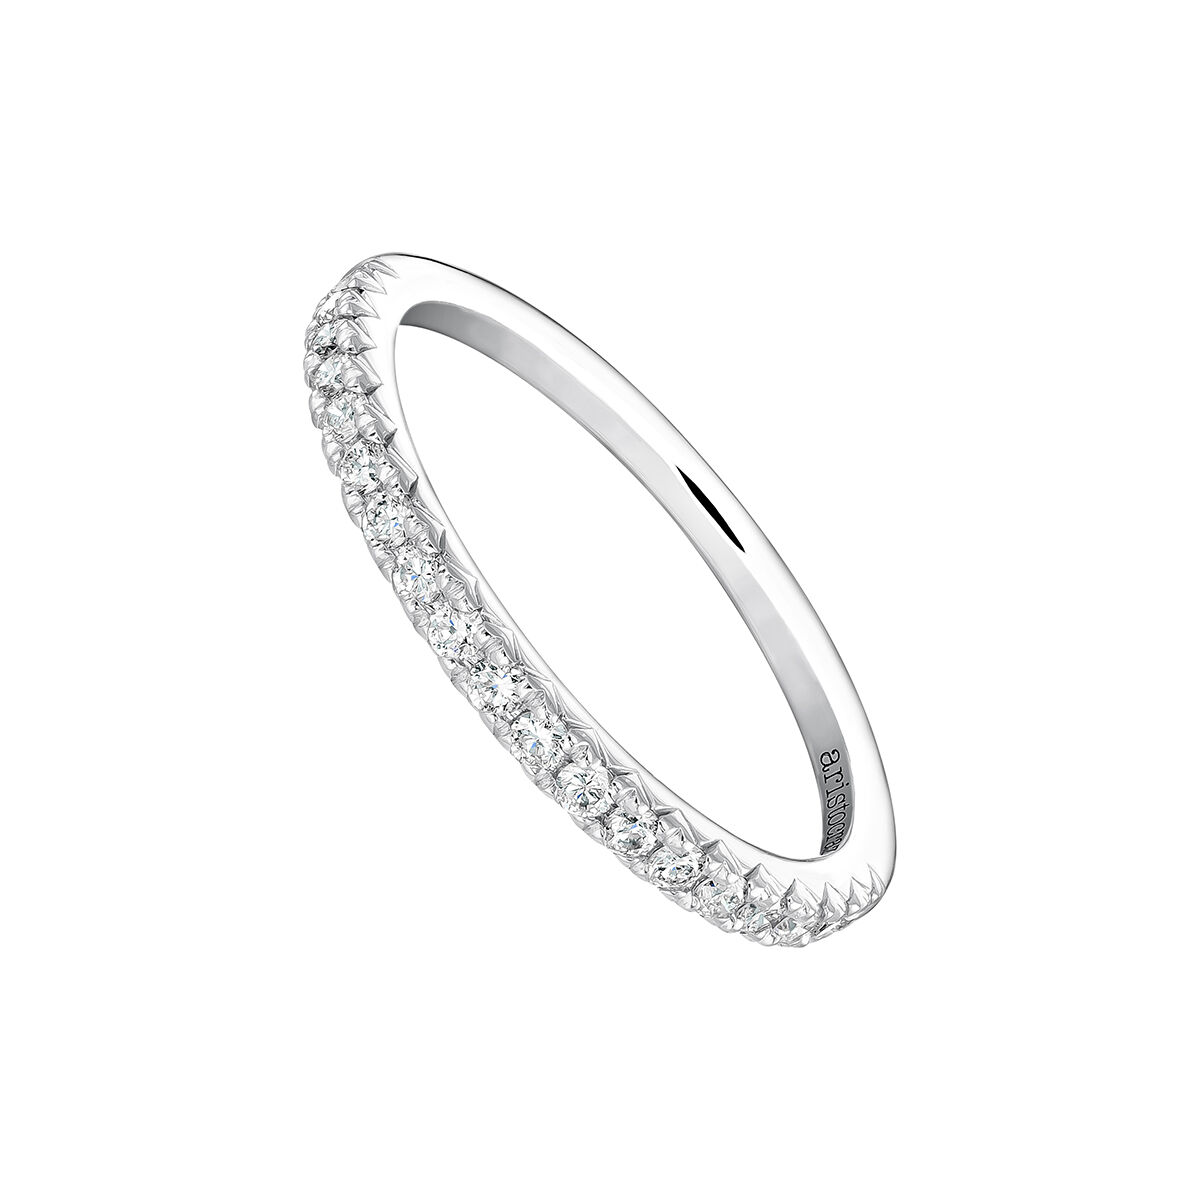 Engagement ring in 18k white gold with 0.25ct diamonds, J03938-01-25, hi-res